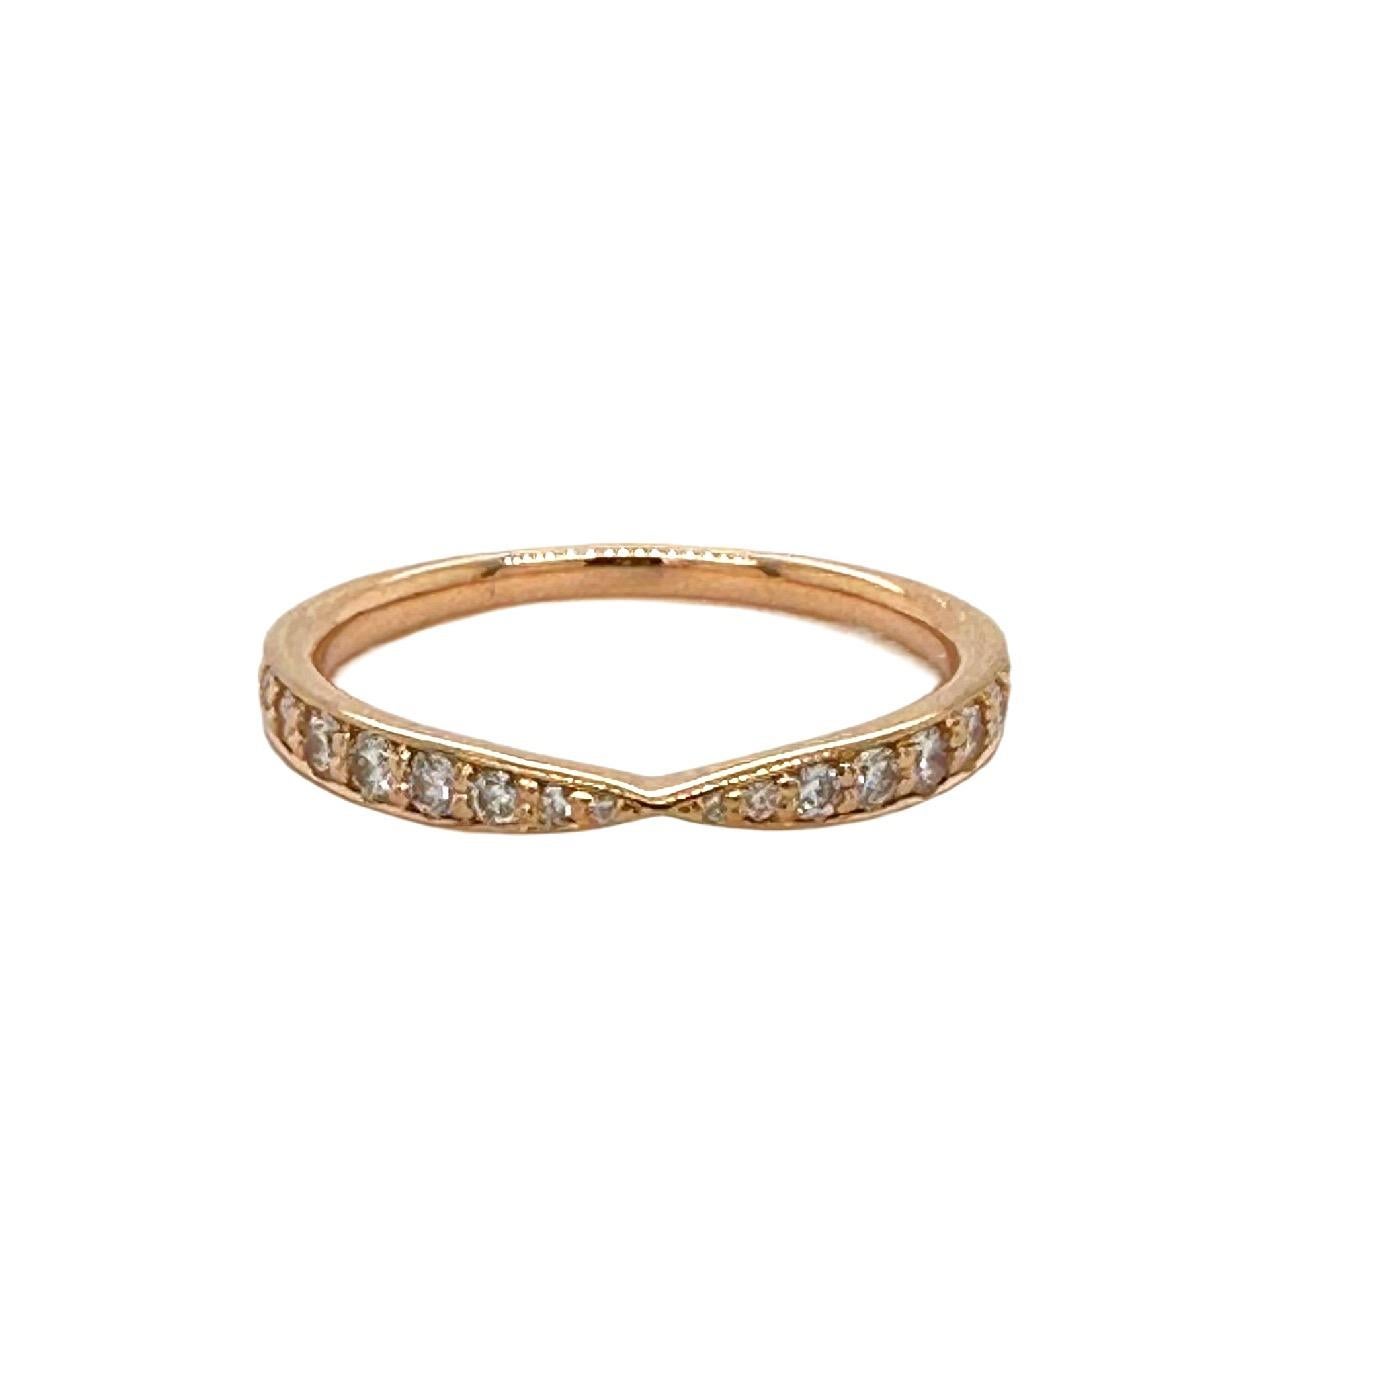 Tiffany & Co. Harmony Diamond Band Ring
Style:  Band
Ref. number:  60004597
Metal:  18kt Rose Gold
Size:  6
Width:  1.8 MM
TCW:  0.23 tcw
Main Diamond:  20 Round Brilliant Diamonds
Color & Clarity:  G, VS
Hallmark:  ©TIFFANY&CO. AU750
Includes:  T&C